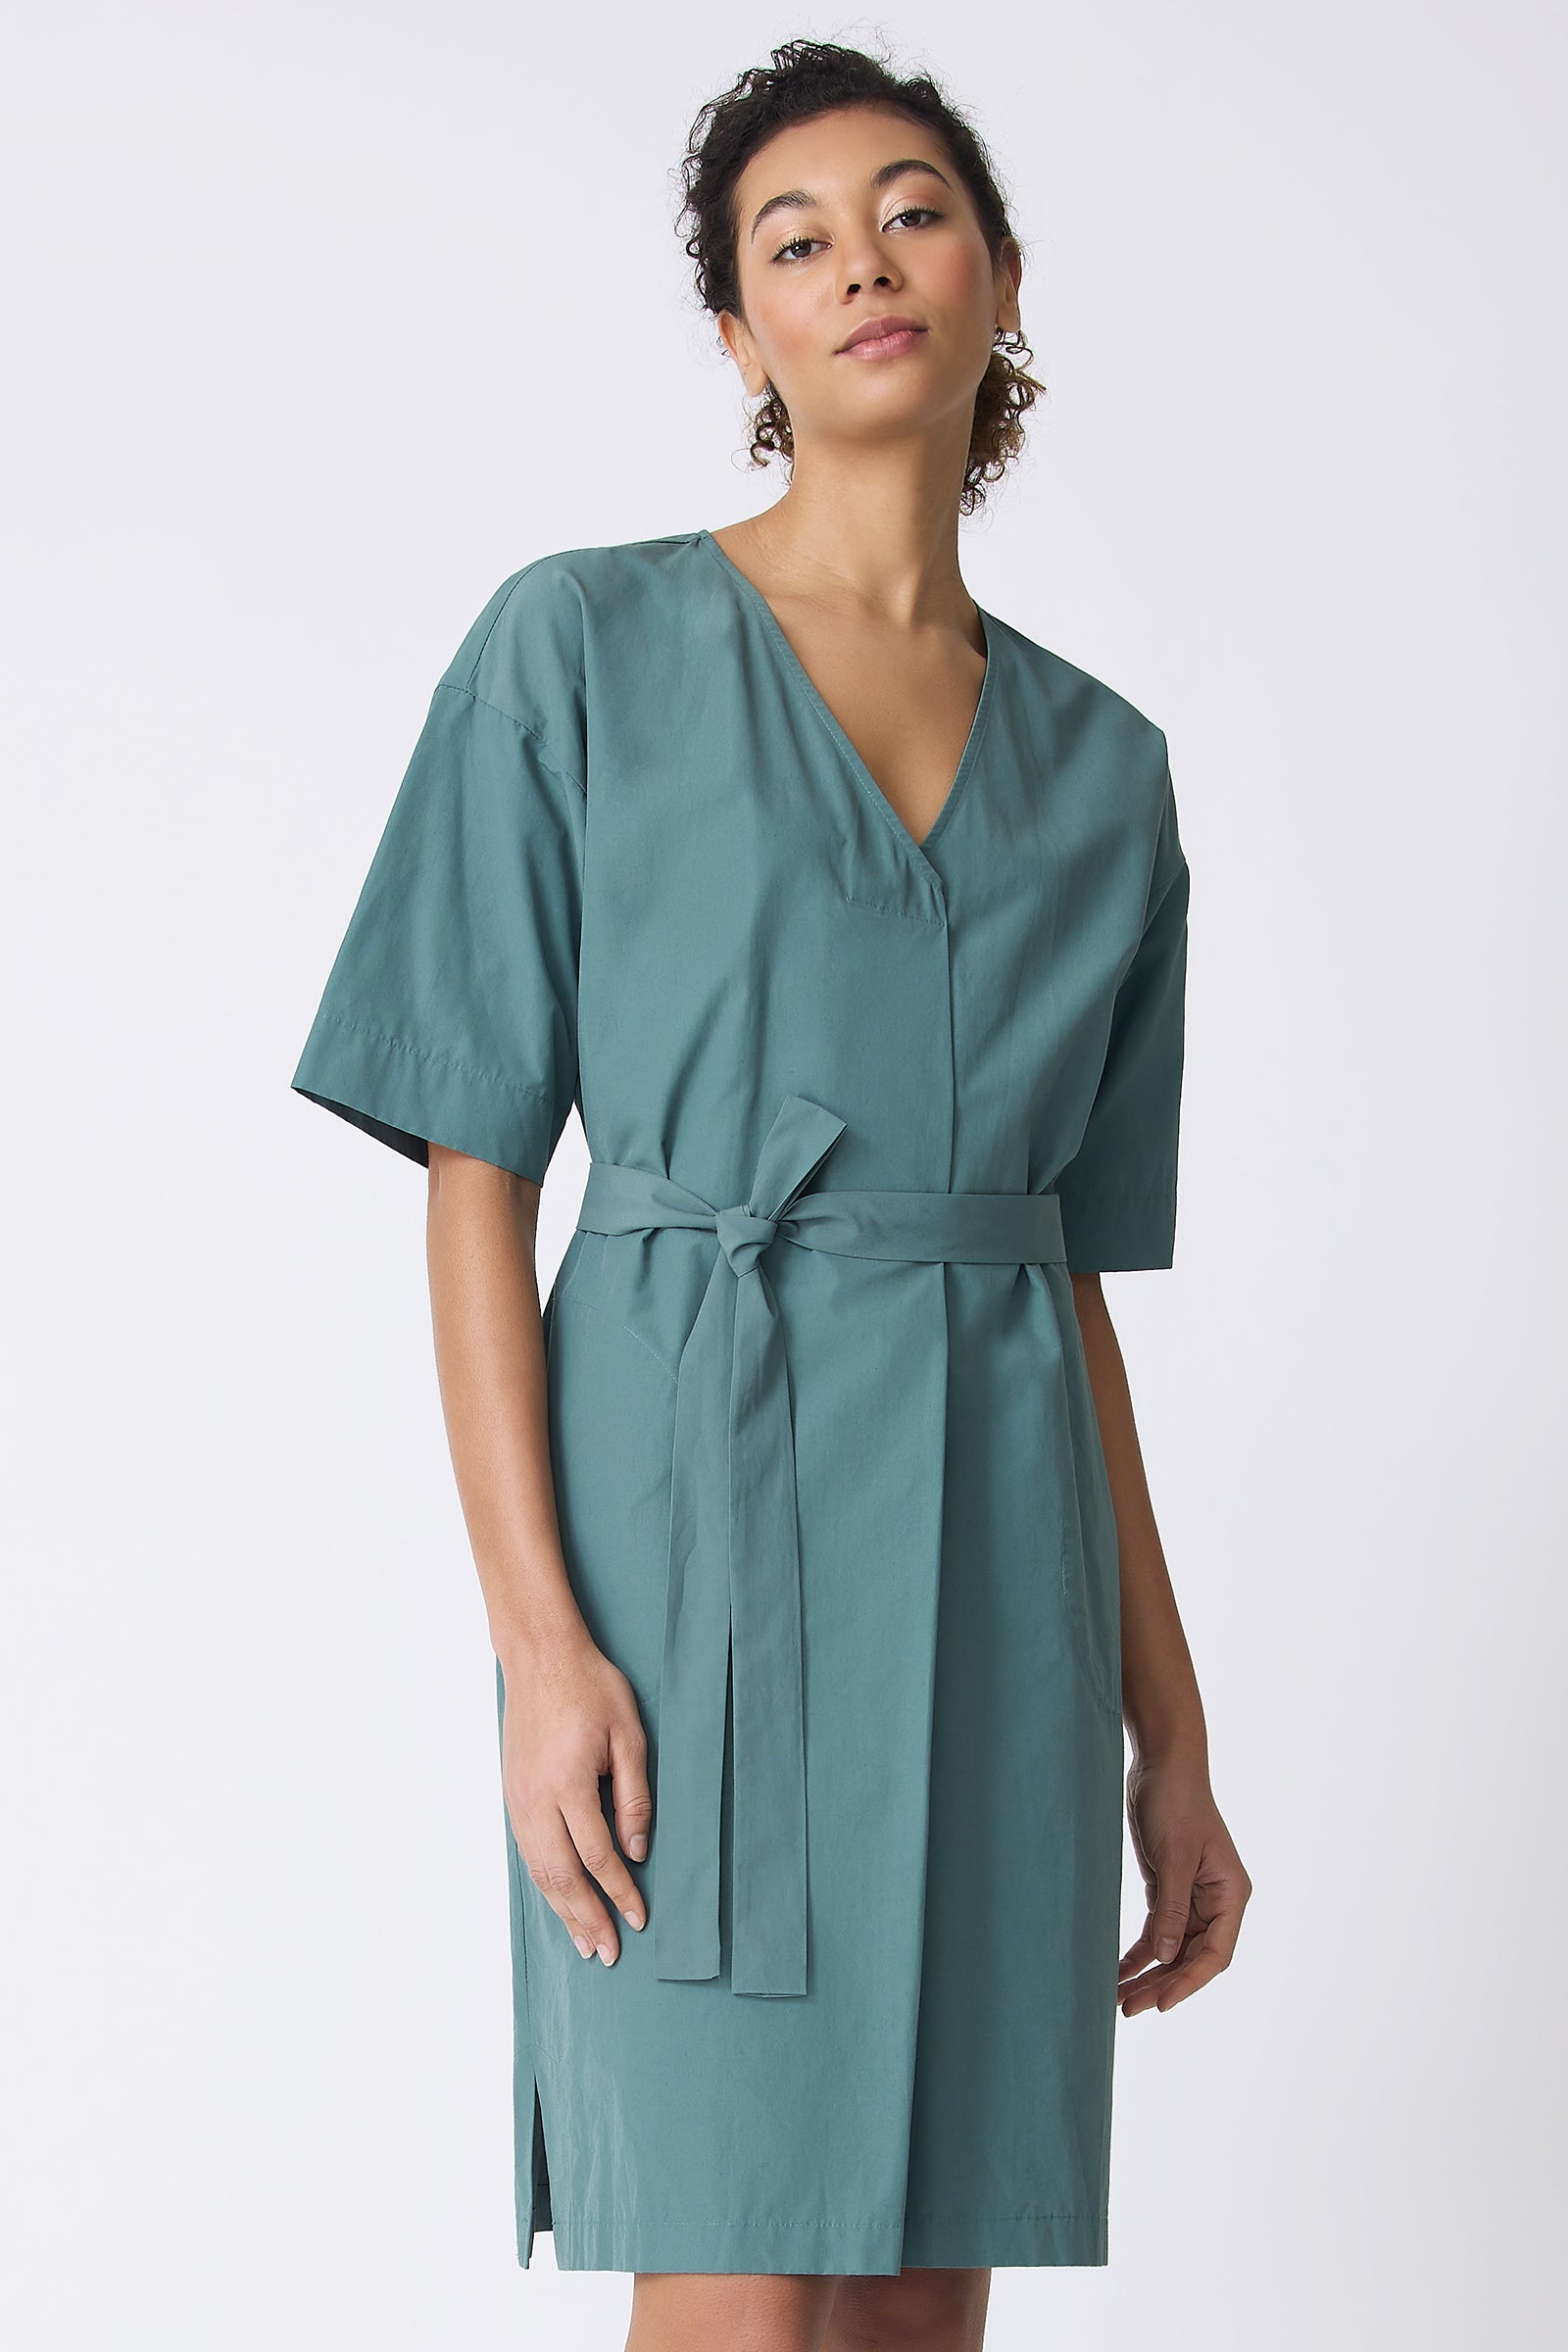 Kal Rieman Cara Fold Front Dress in Sage on model front view